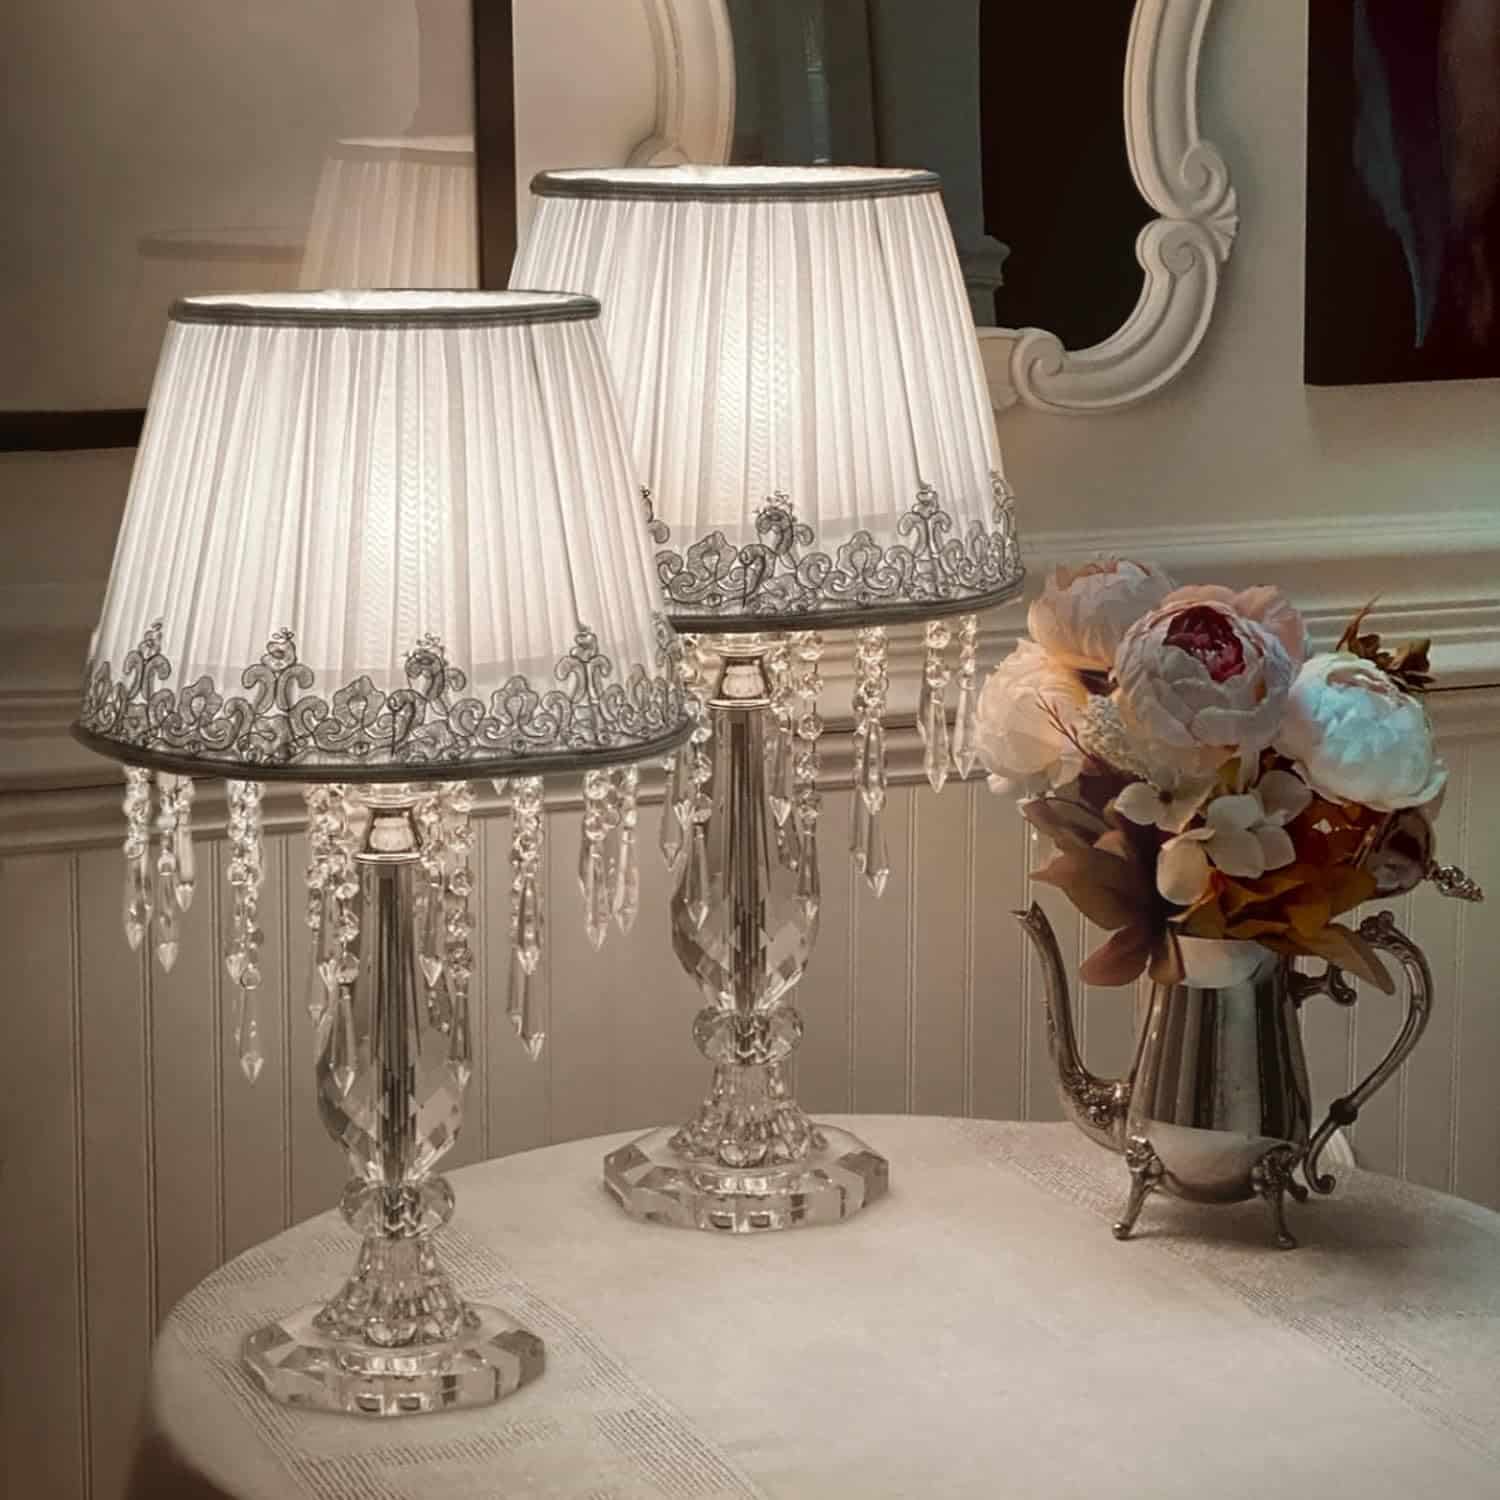 Moooni Crystal Table Lamp Review